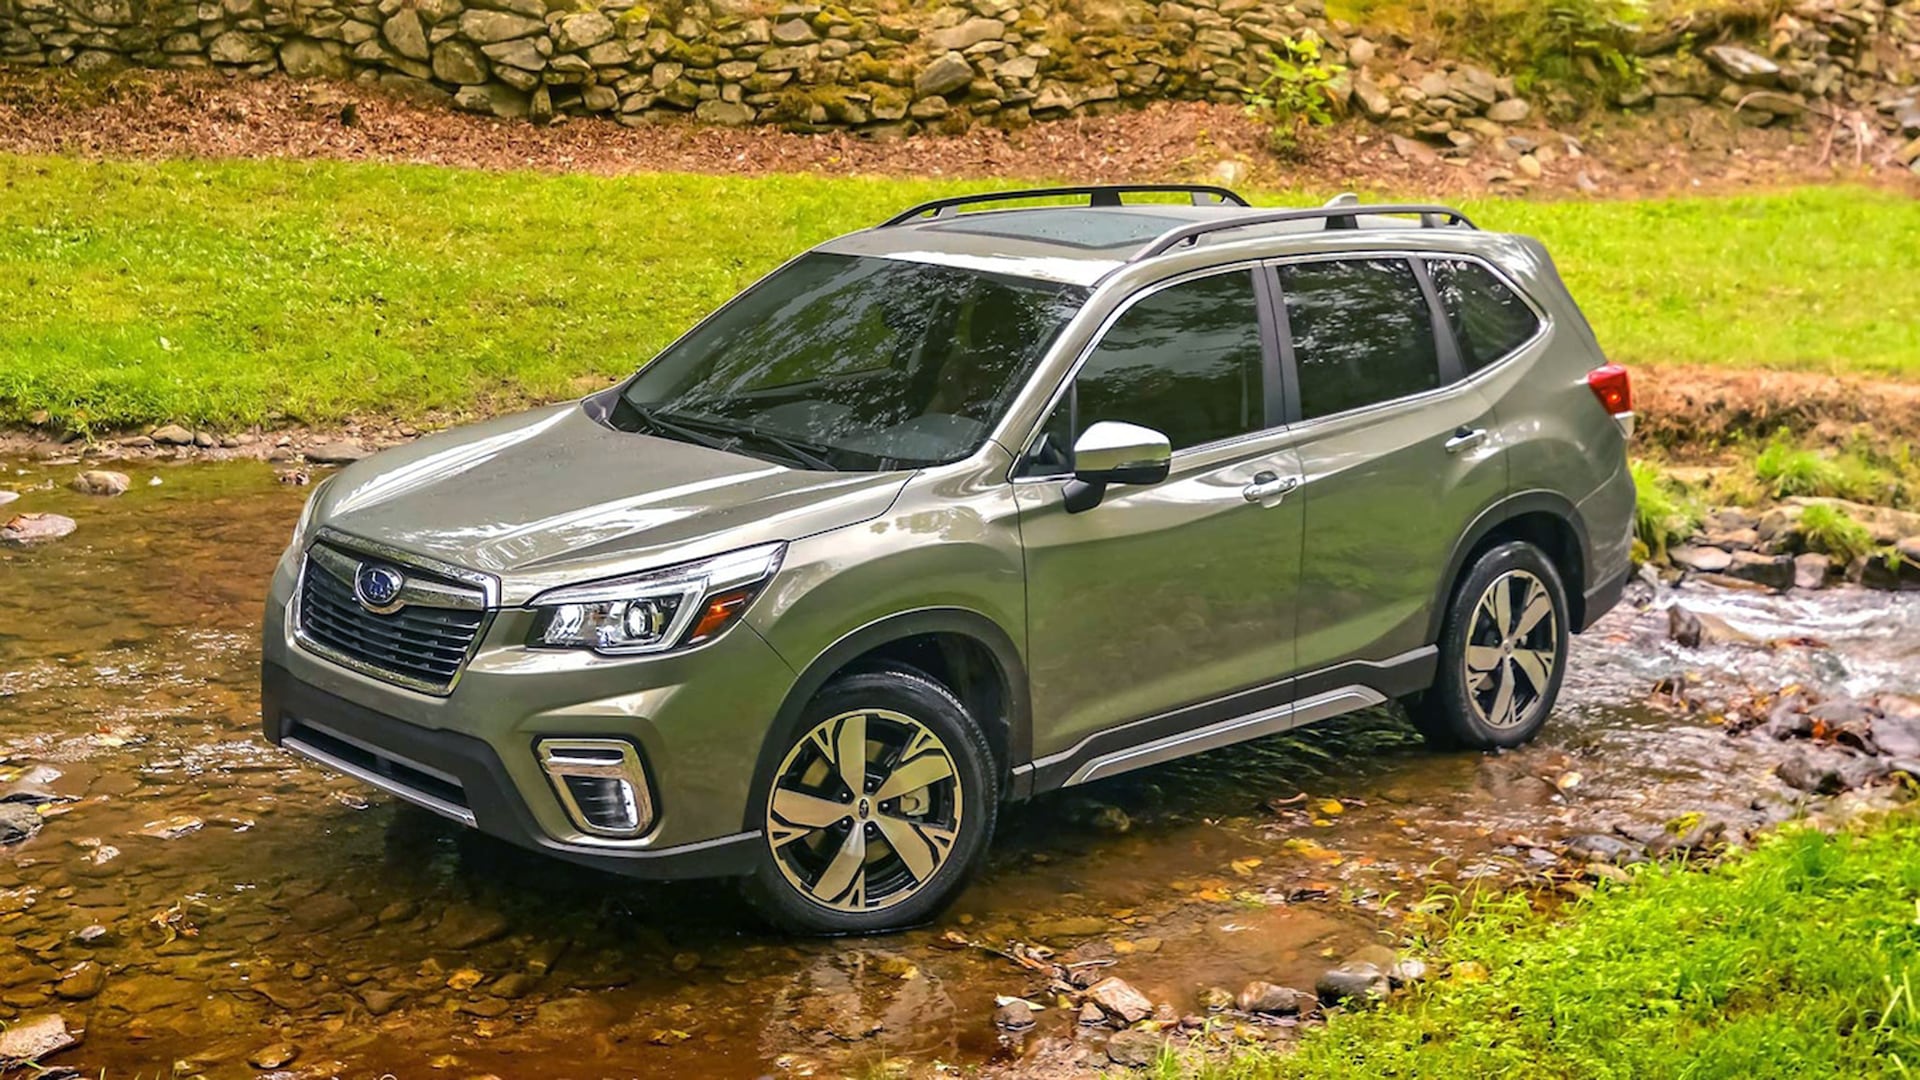 2021 Subaru Forester Prices, Reviews, and Photos - MotorTrend